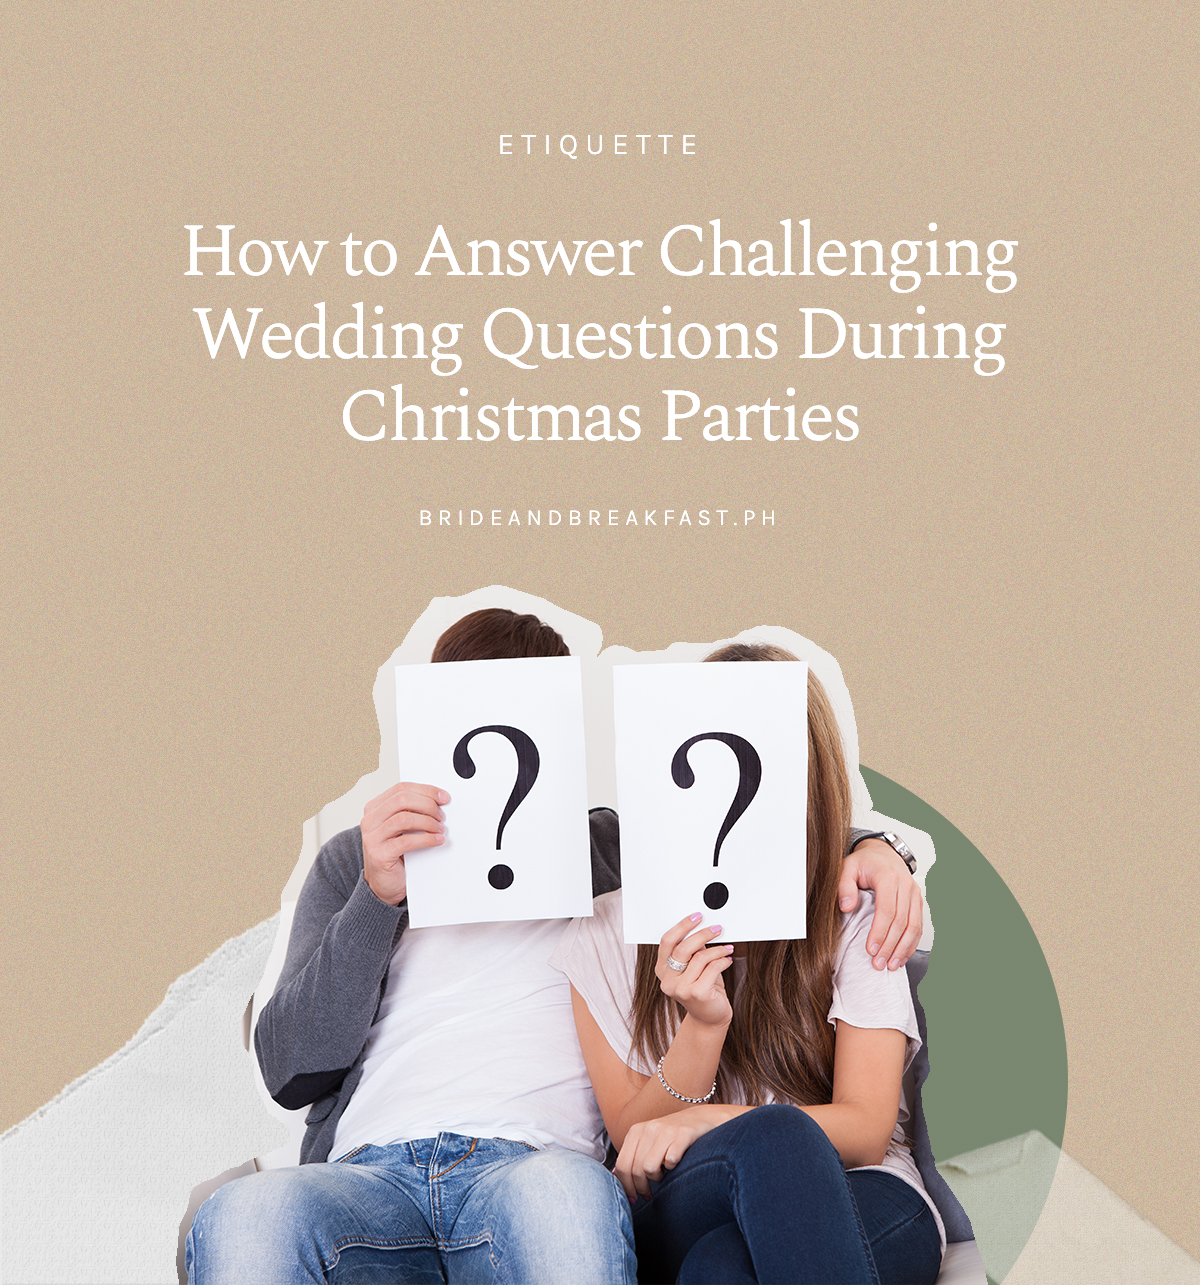 How to Answer Challenging Wedding Questions During Christmas Parties